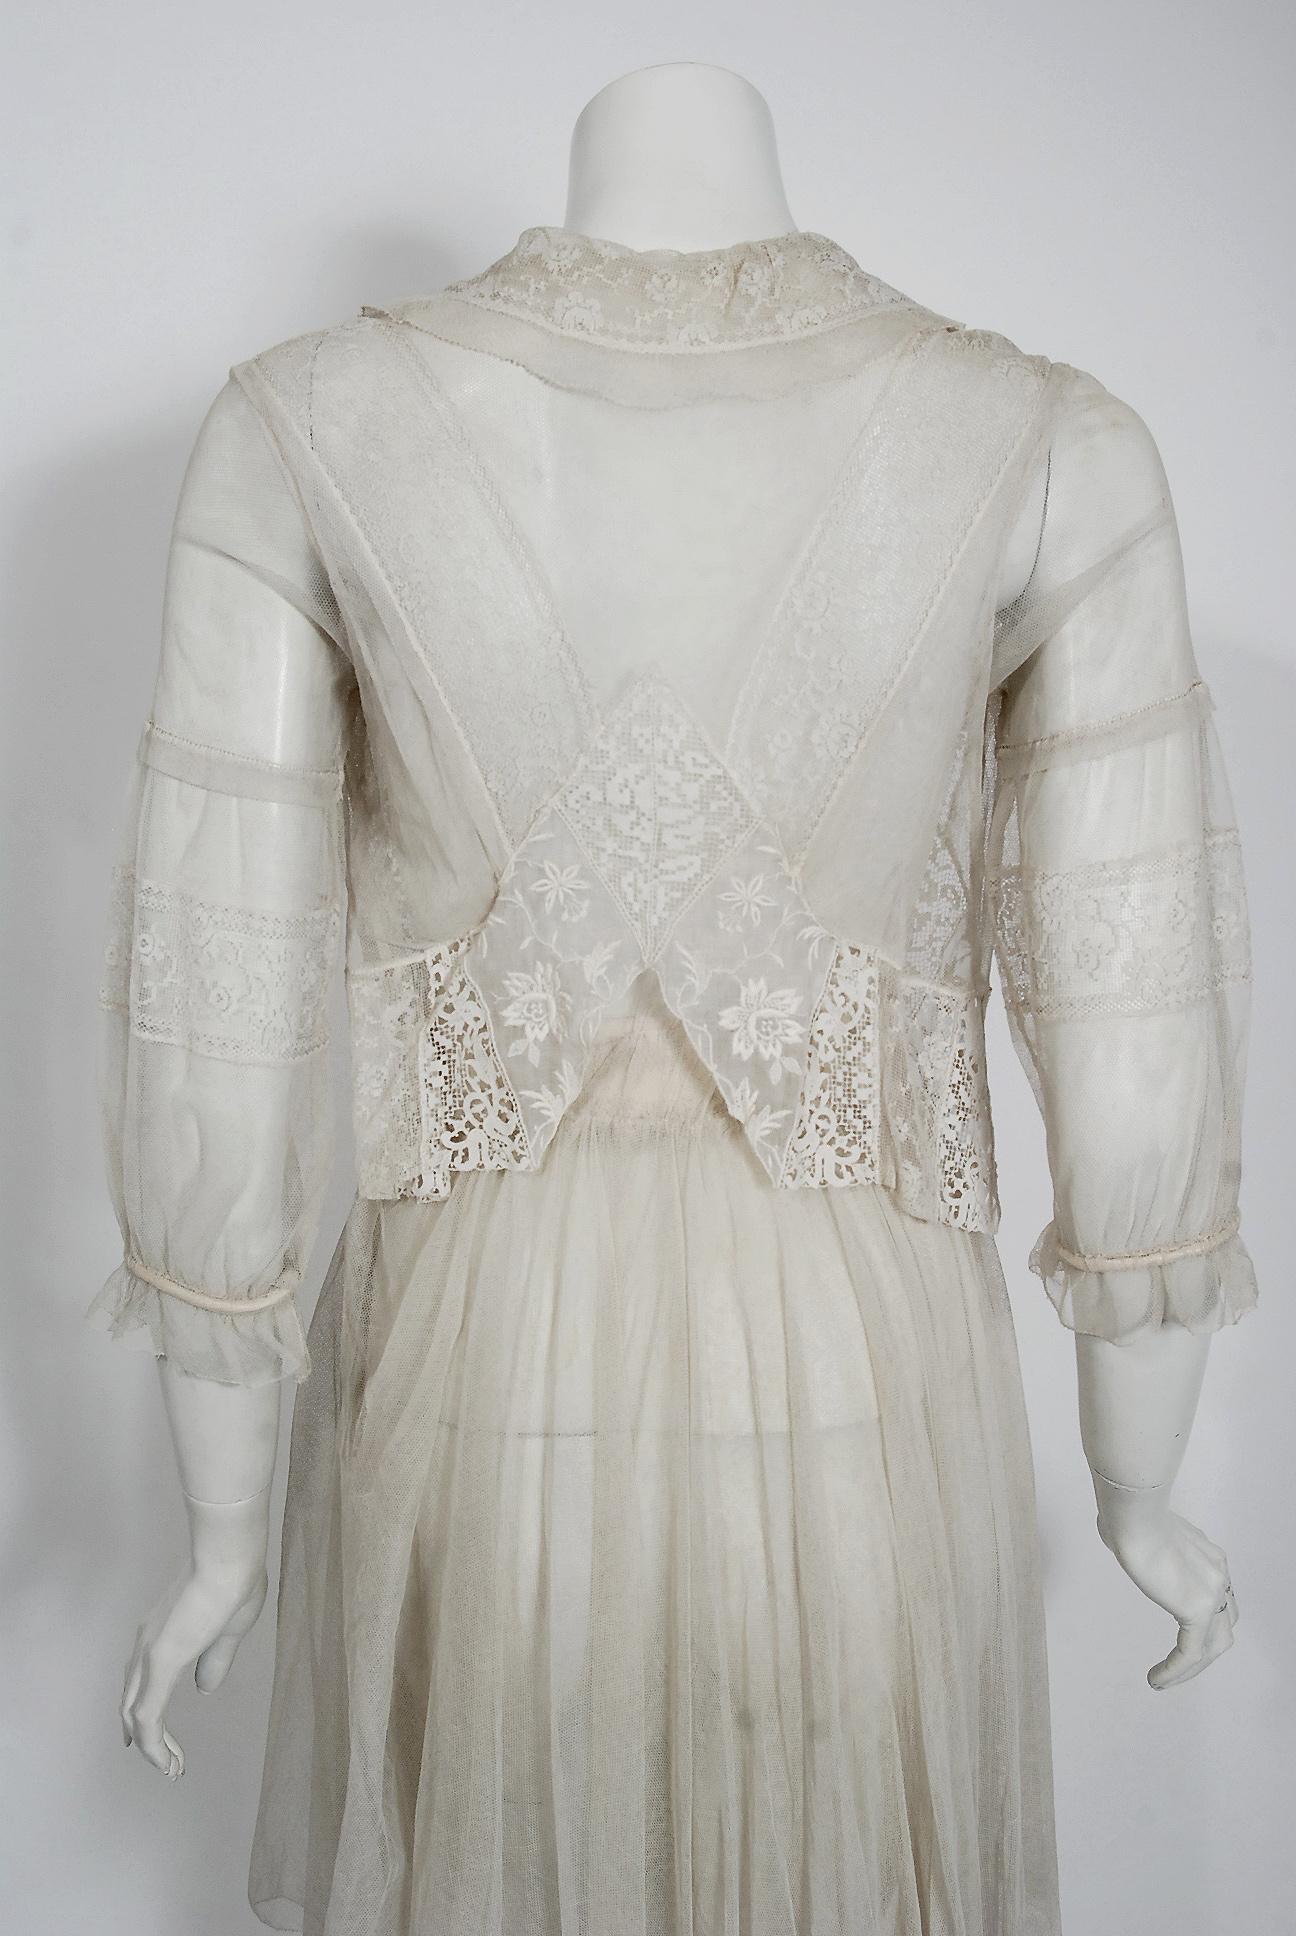 Women's Vintage 1910's Ivory Sheer Embroidered Floral Lace & Tulle Tiered Bridal Gown  For Sale